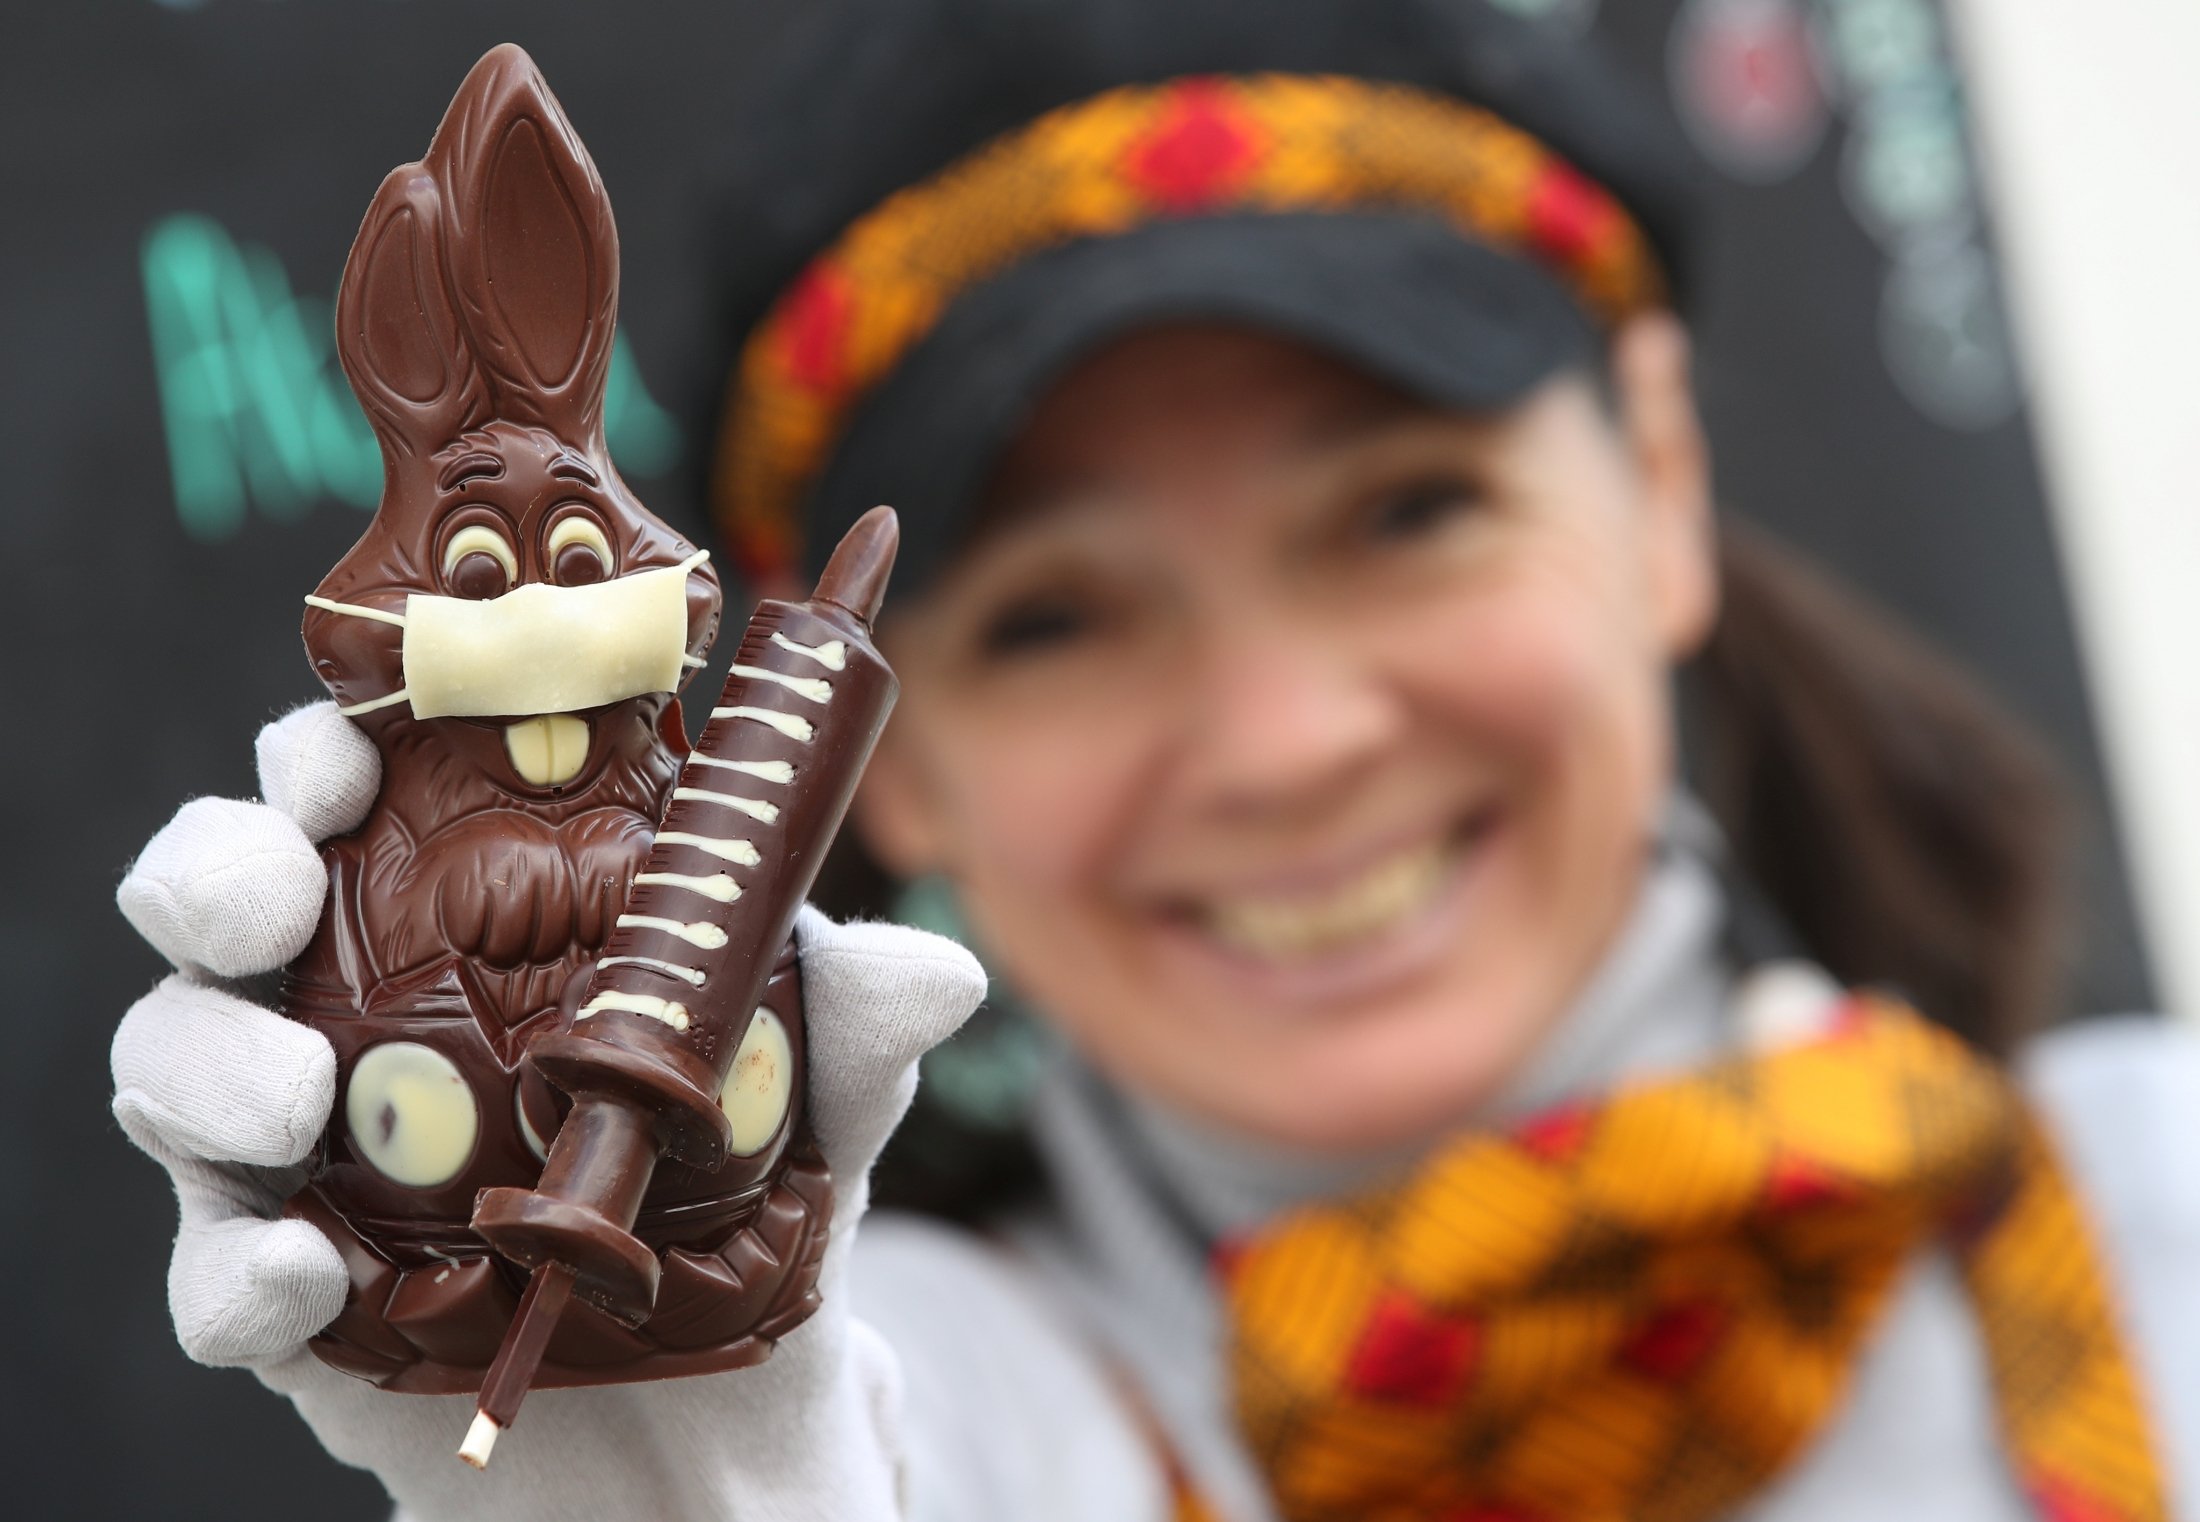 Belgian artisan chocolate maker Genevieve Trepant shows a chocolate bunny wearing a protective mask and holding a vaccine syringe called 'L'Atch'a Azteka' at her workshop, Cocoatree in Lonzee, Belgium, April 30, 2021. (Reuters Photo)